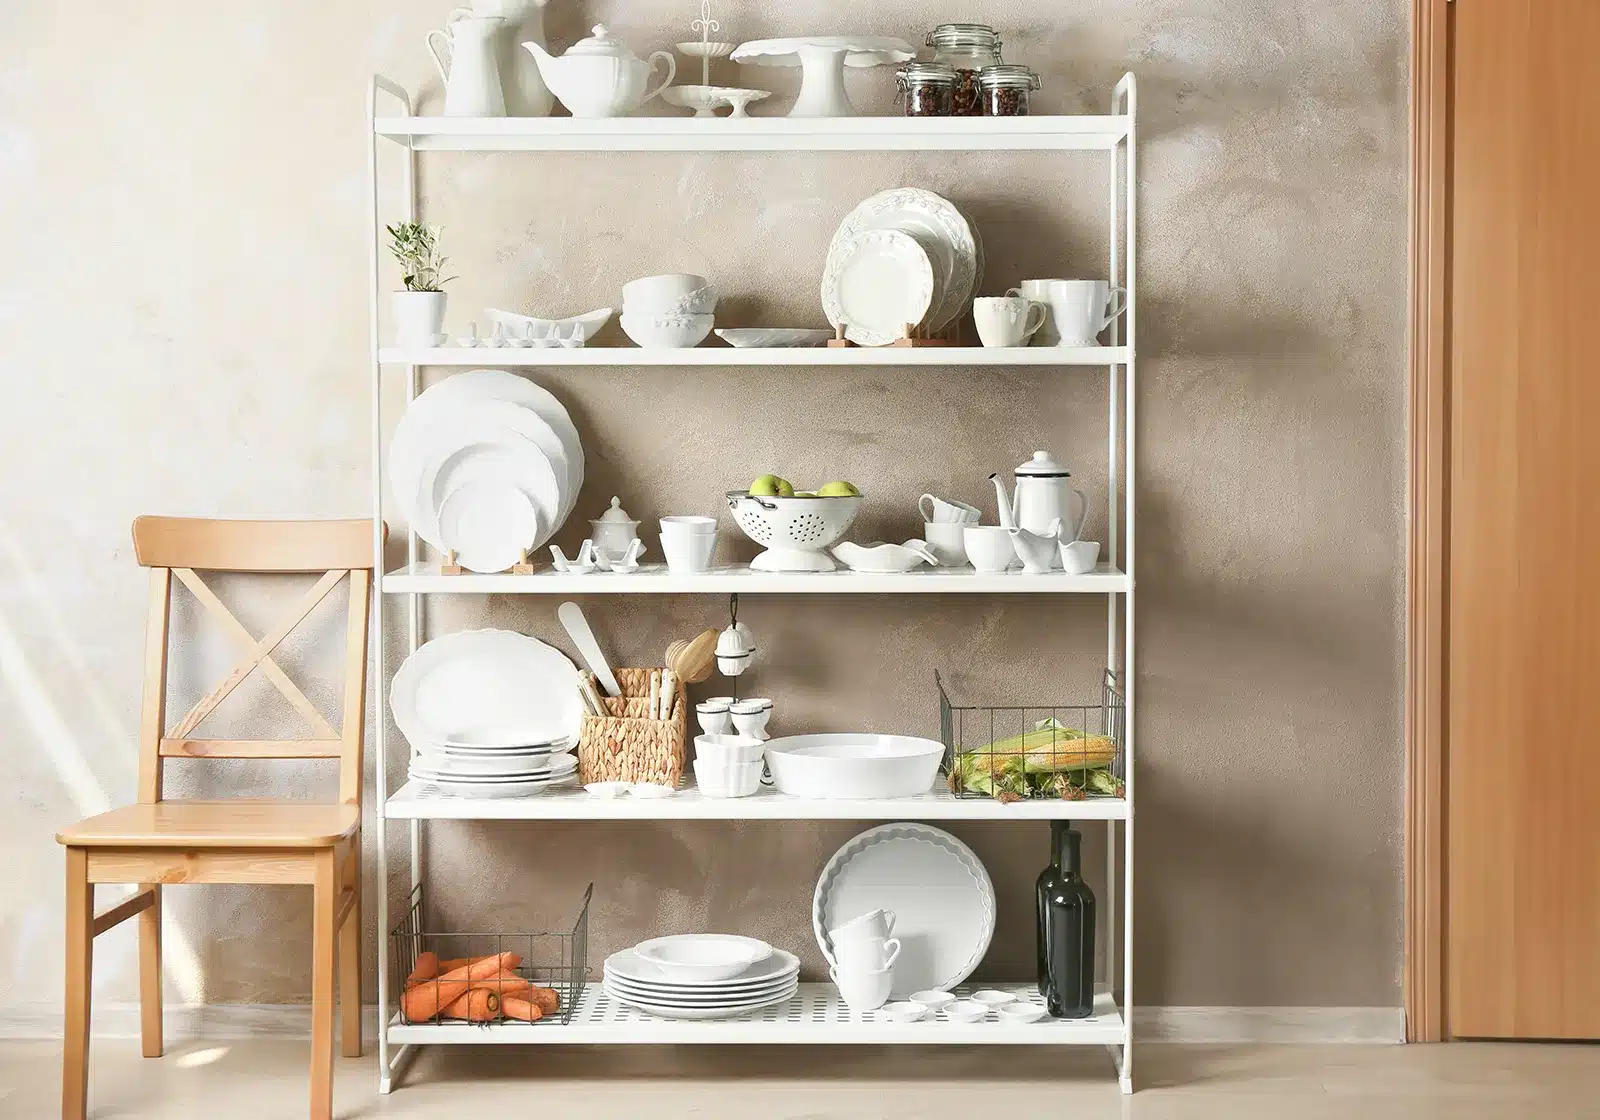 A freestanding shelving unit in a kitchen displaying an array of white dishes and kitchenware, adding storage and style to the space.